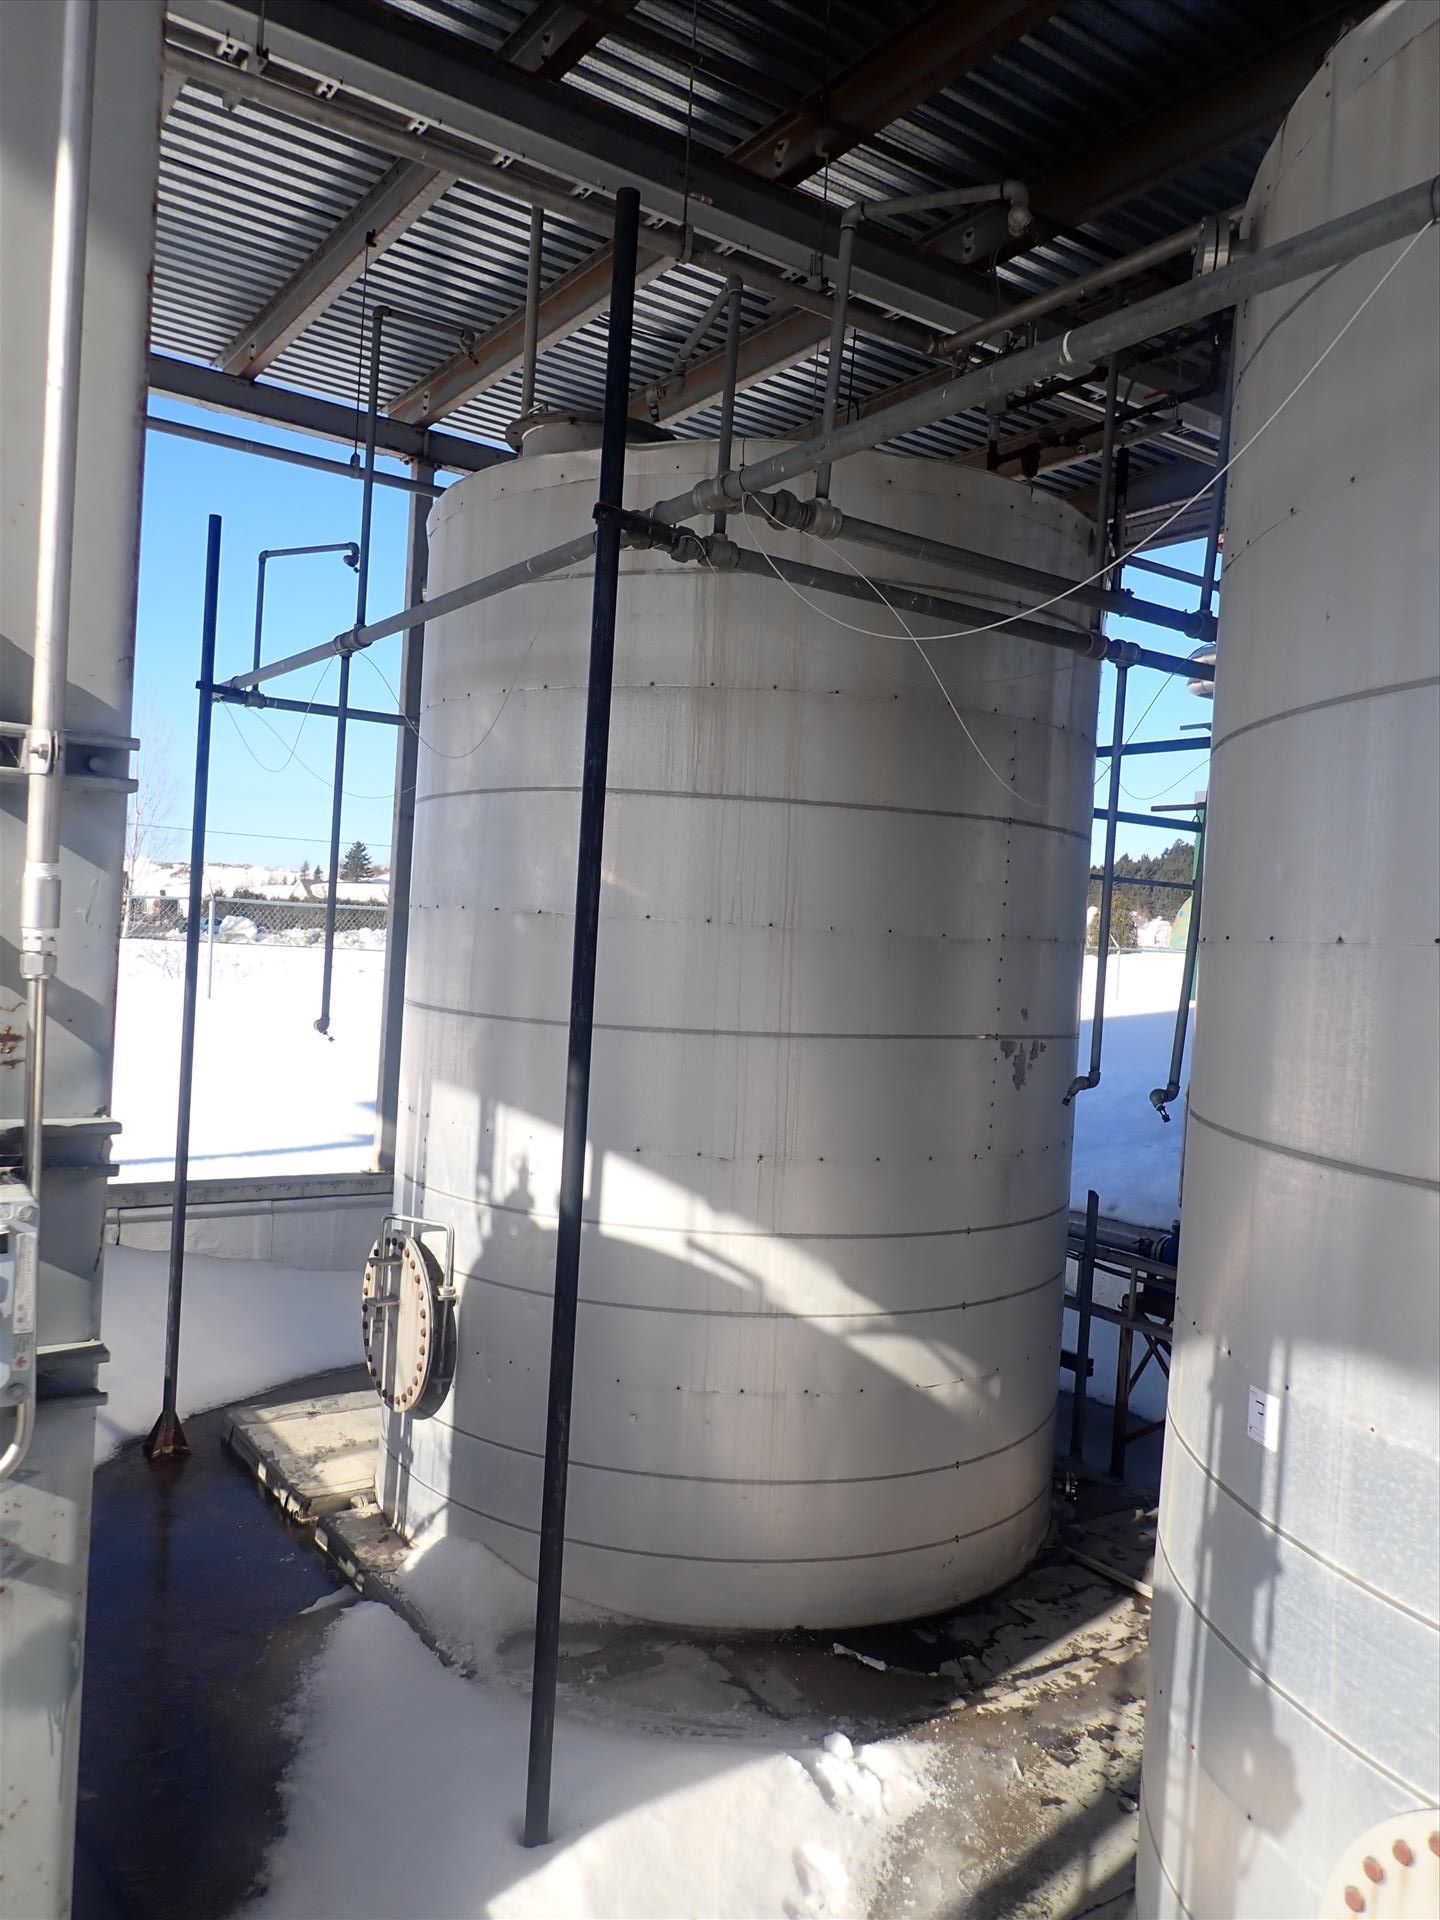 Stainless Steel Tank, approx. 3000 gal.